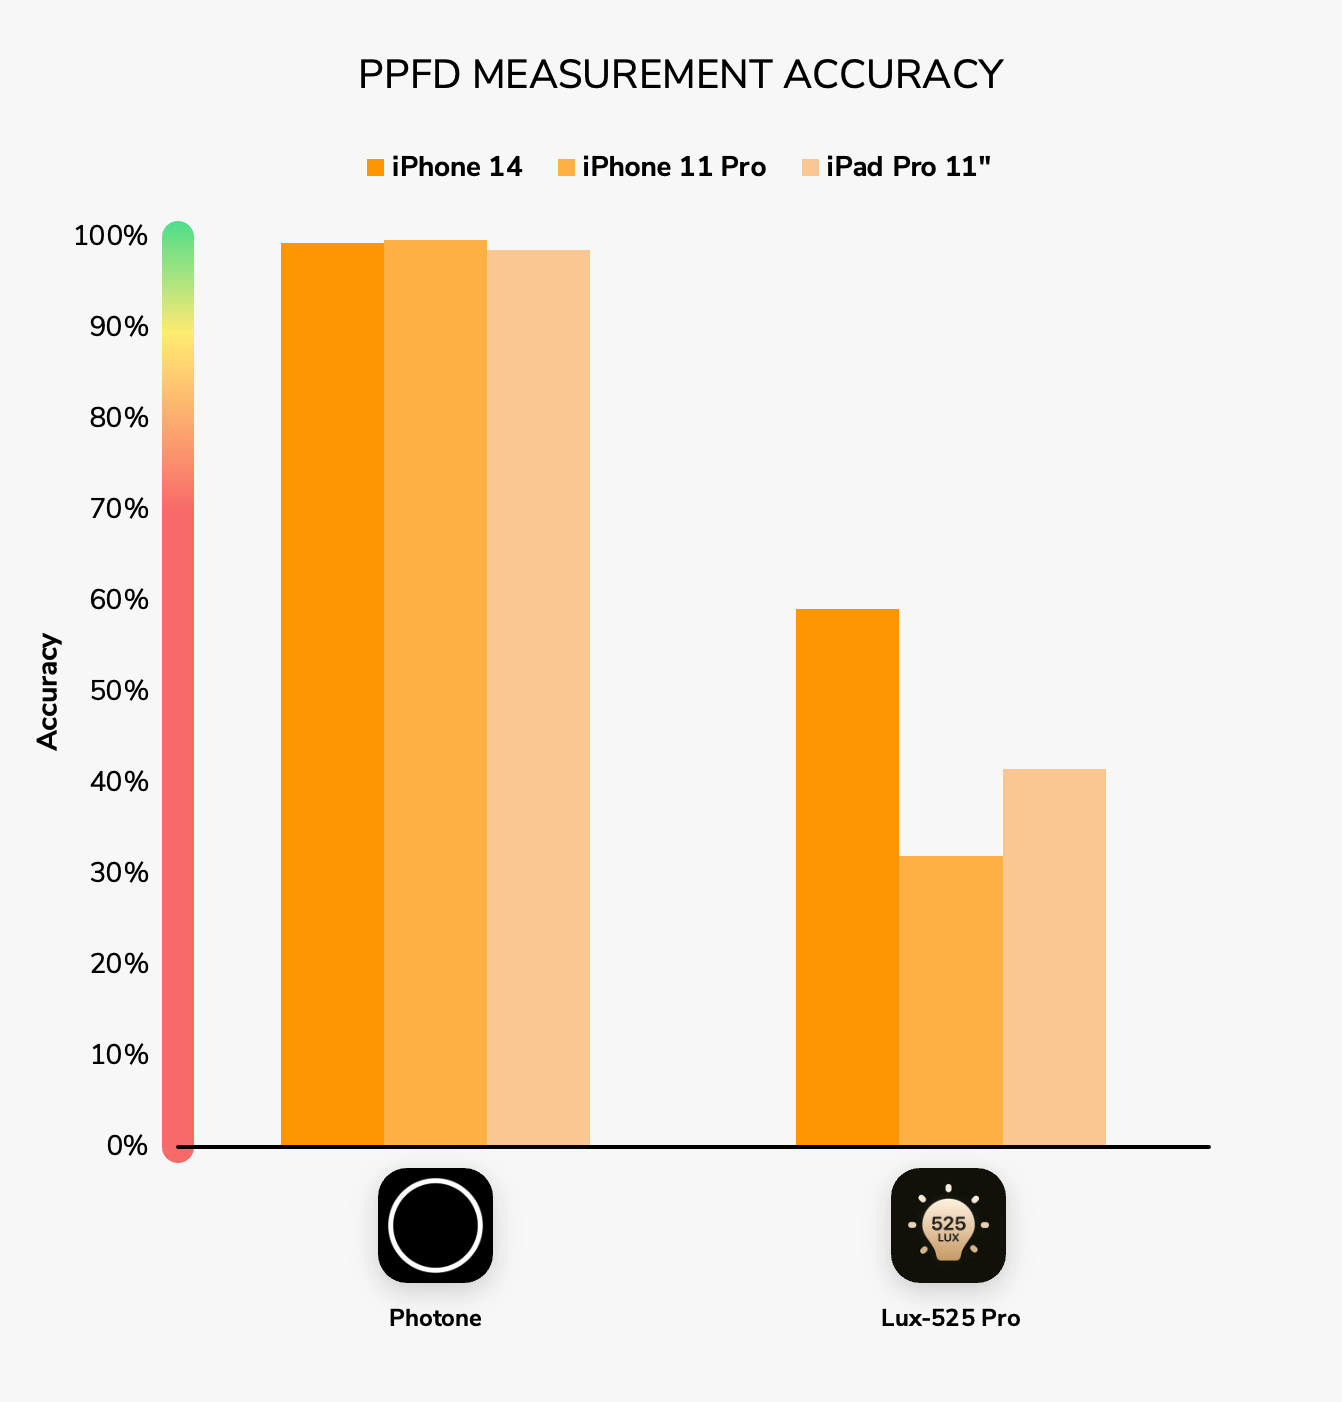 The Photone app is a very accurate PPFD meter app